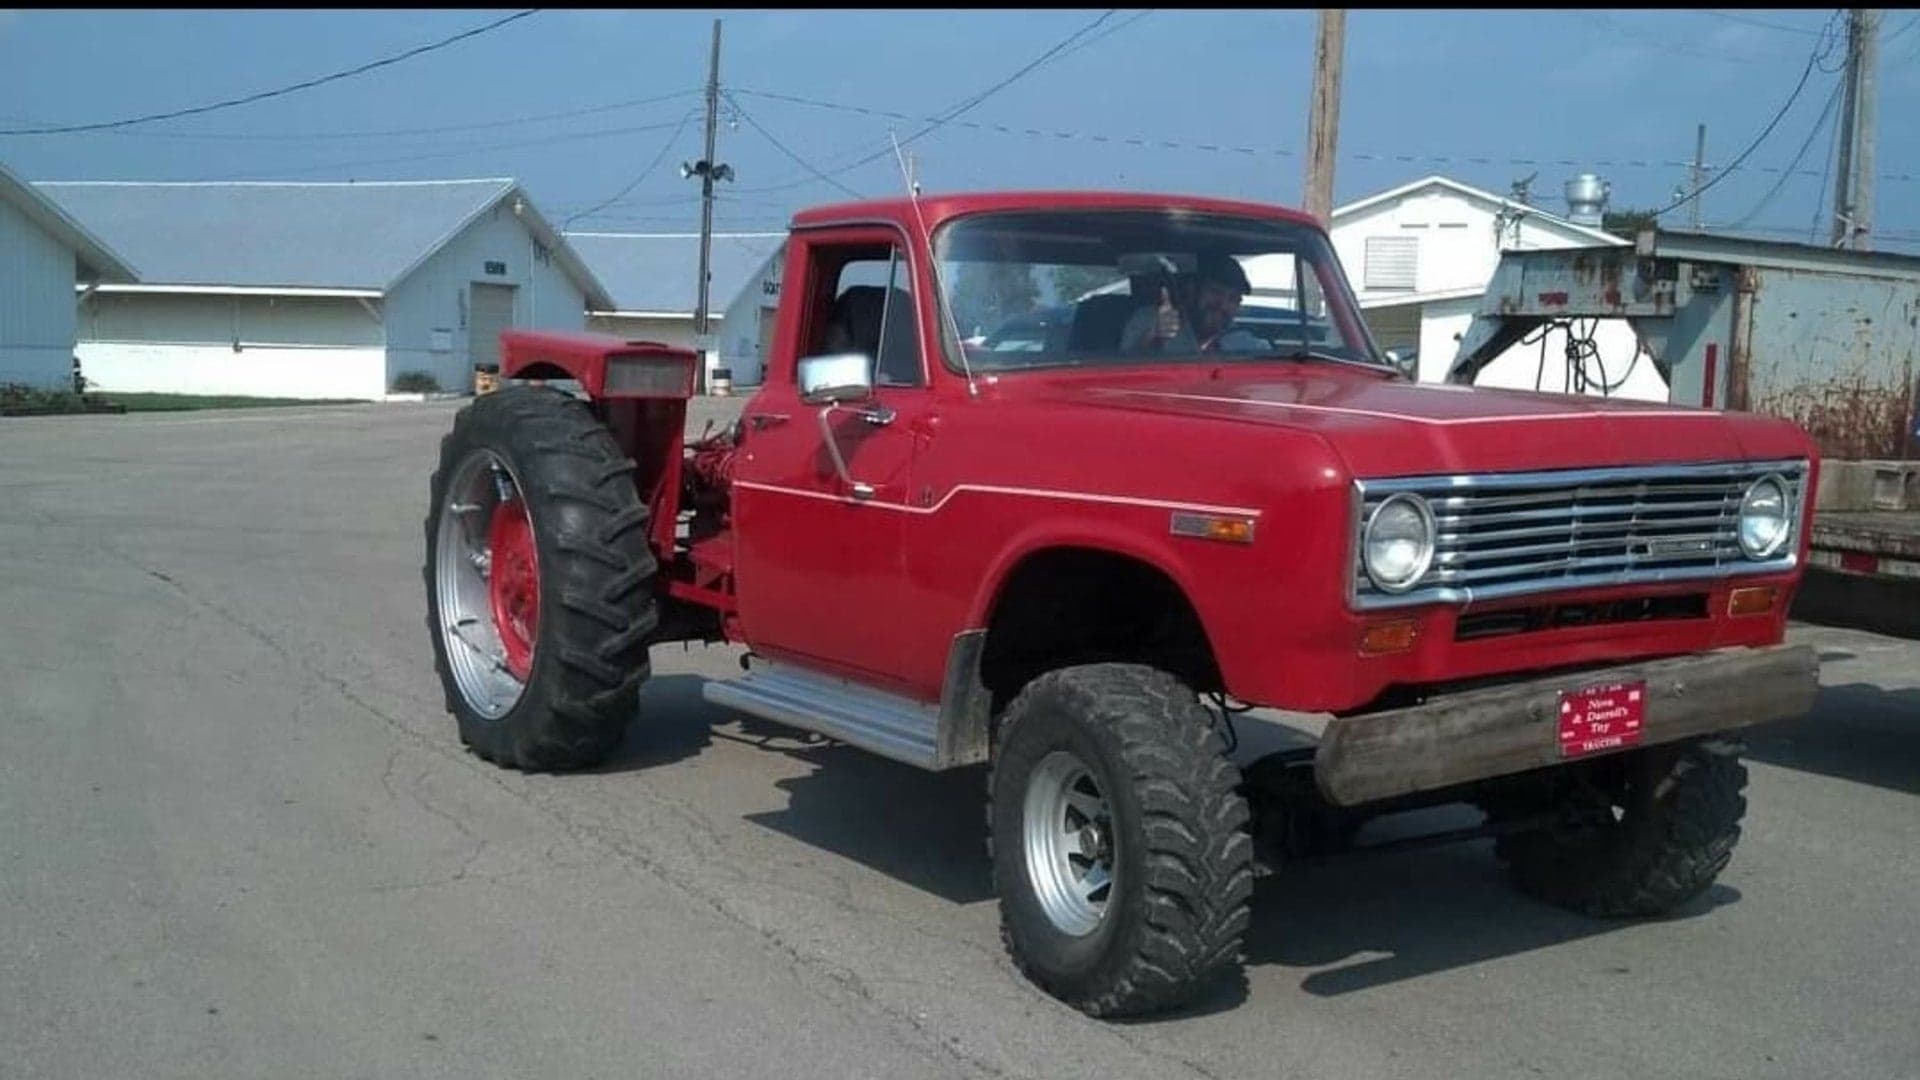 The 4WD International Harvester ‘Trucktor’ Is Real, And Yes, You Can Buy It